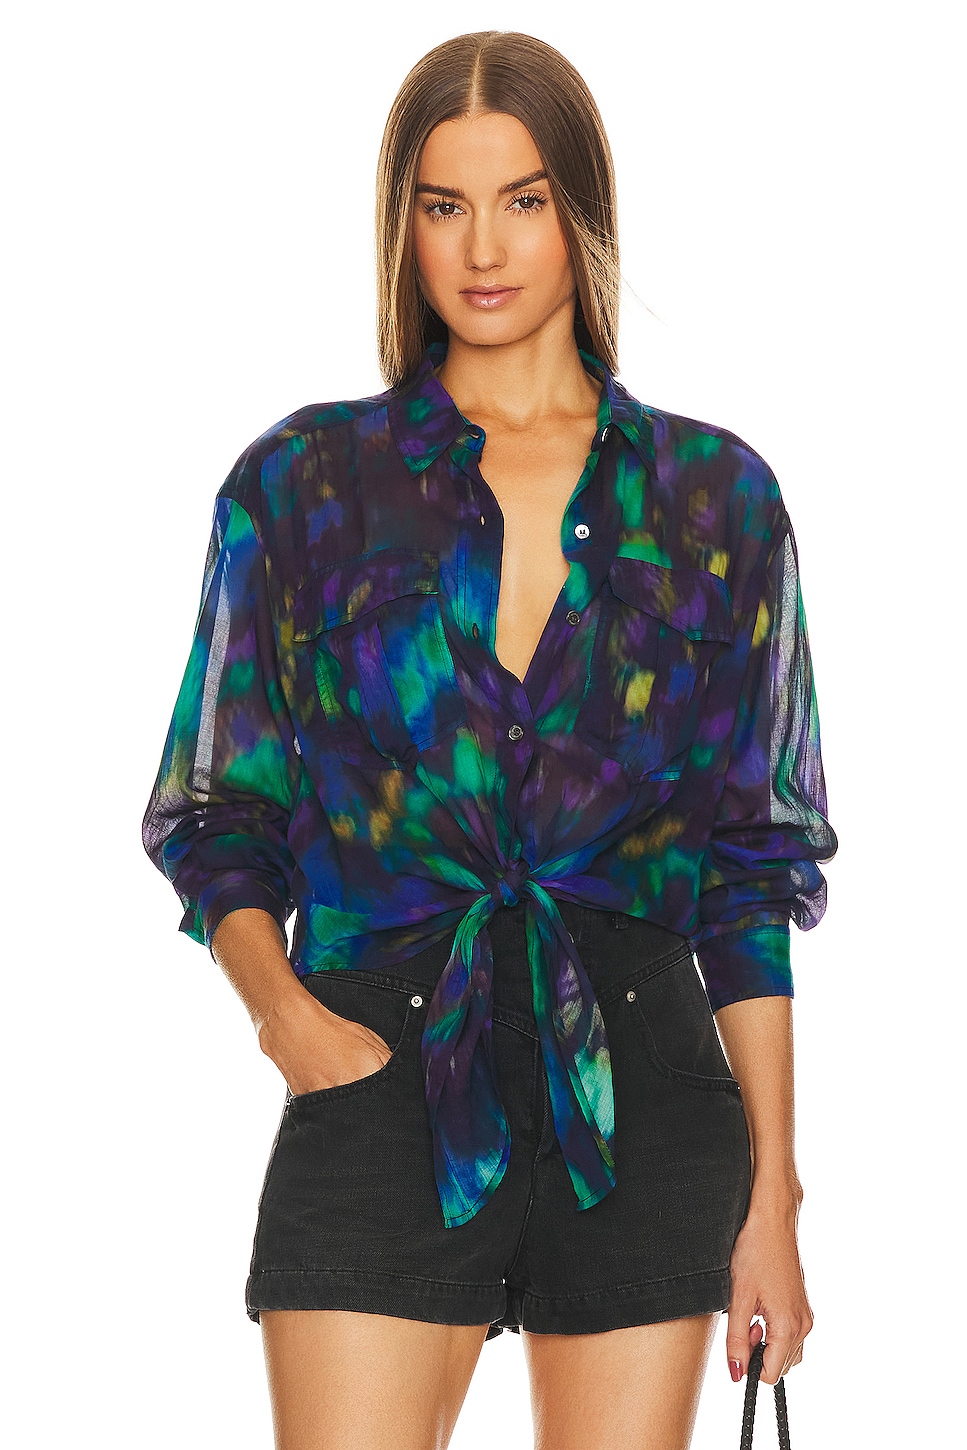 Isabel Marant Etoile Nath Top in Blue & Green | REVOLVE